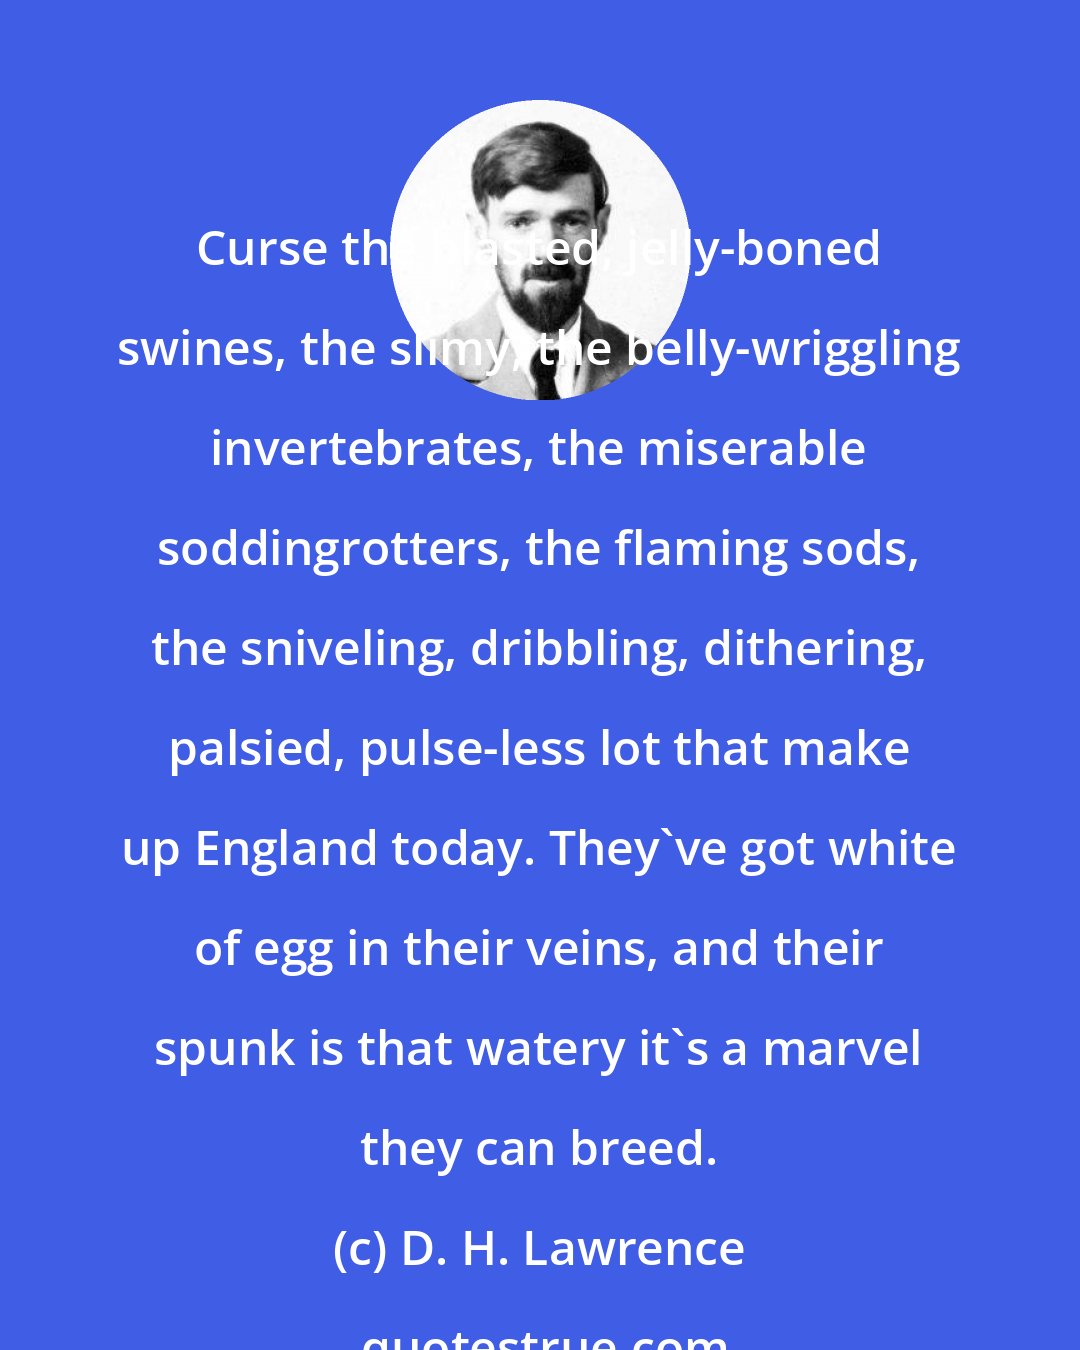 D. H. Lawrence: Curse the blasted, jelly-boned swines, the slimy, the belly-wriggling invertebrates, the miserable soddingrotters, the flaming sods, the sniveling, dribbling, dithering, palsied, pulse-less lot that make up England today. They've got white of egg in their veins, and their spunk is that watery it's a marvel they can breed.